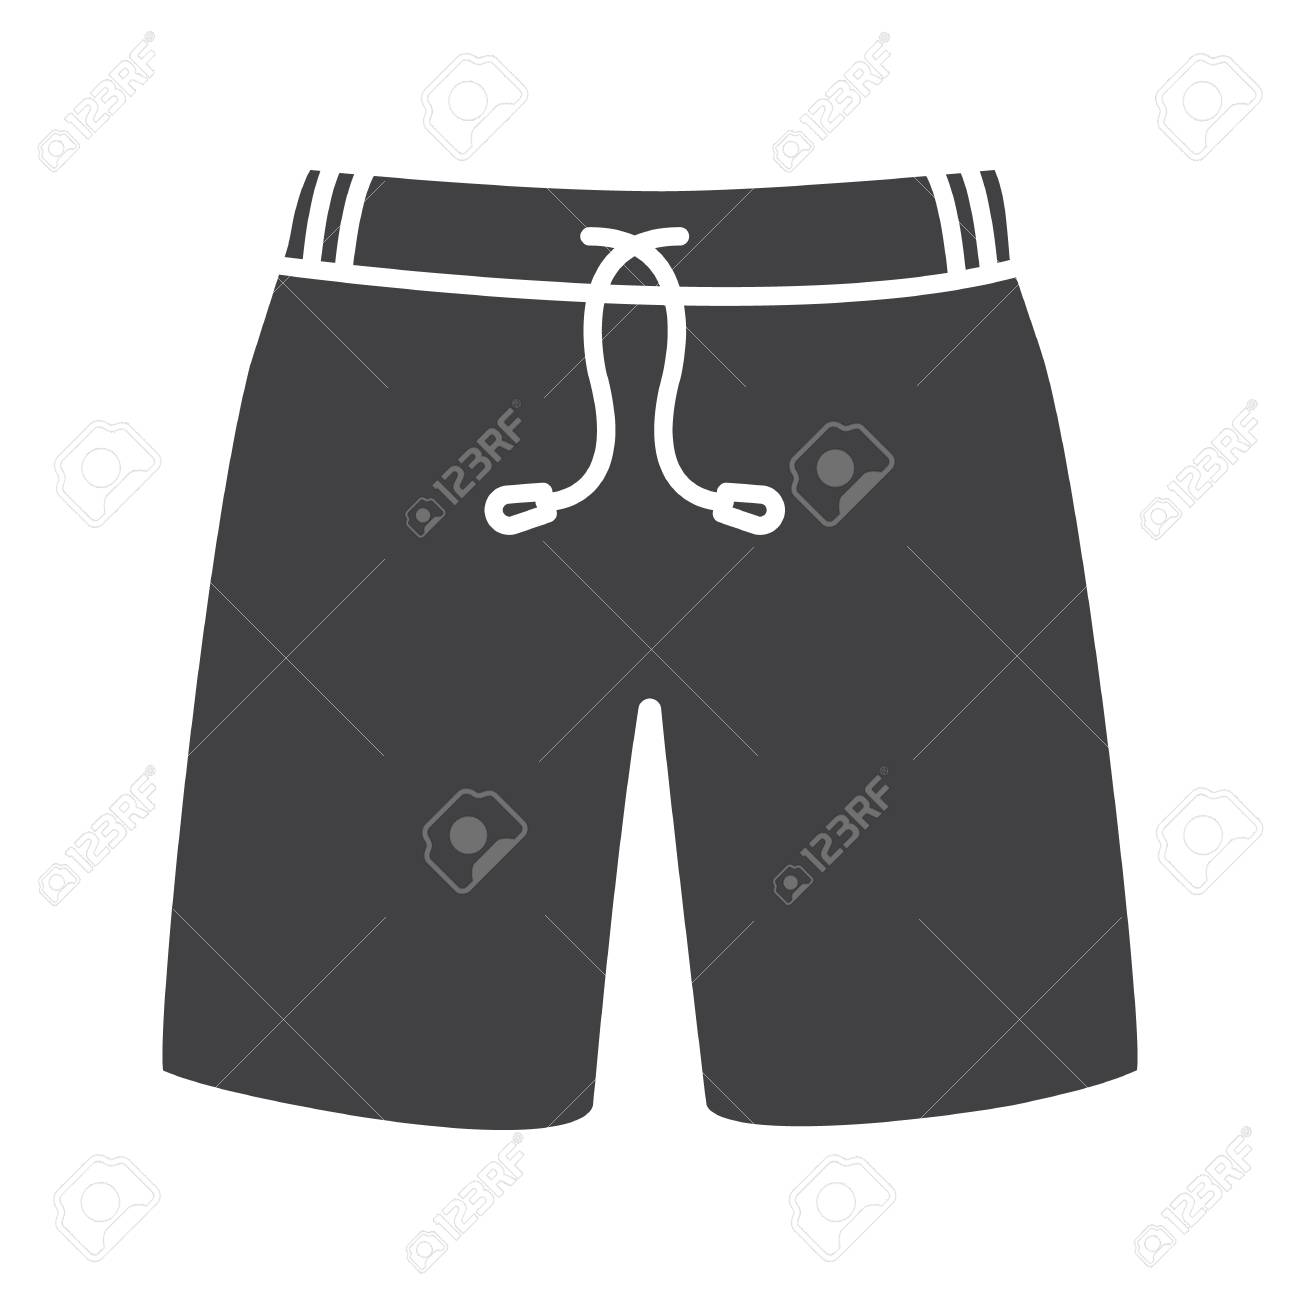 Swimsuit clipart board shorts. Trunk x free clip